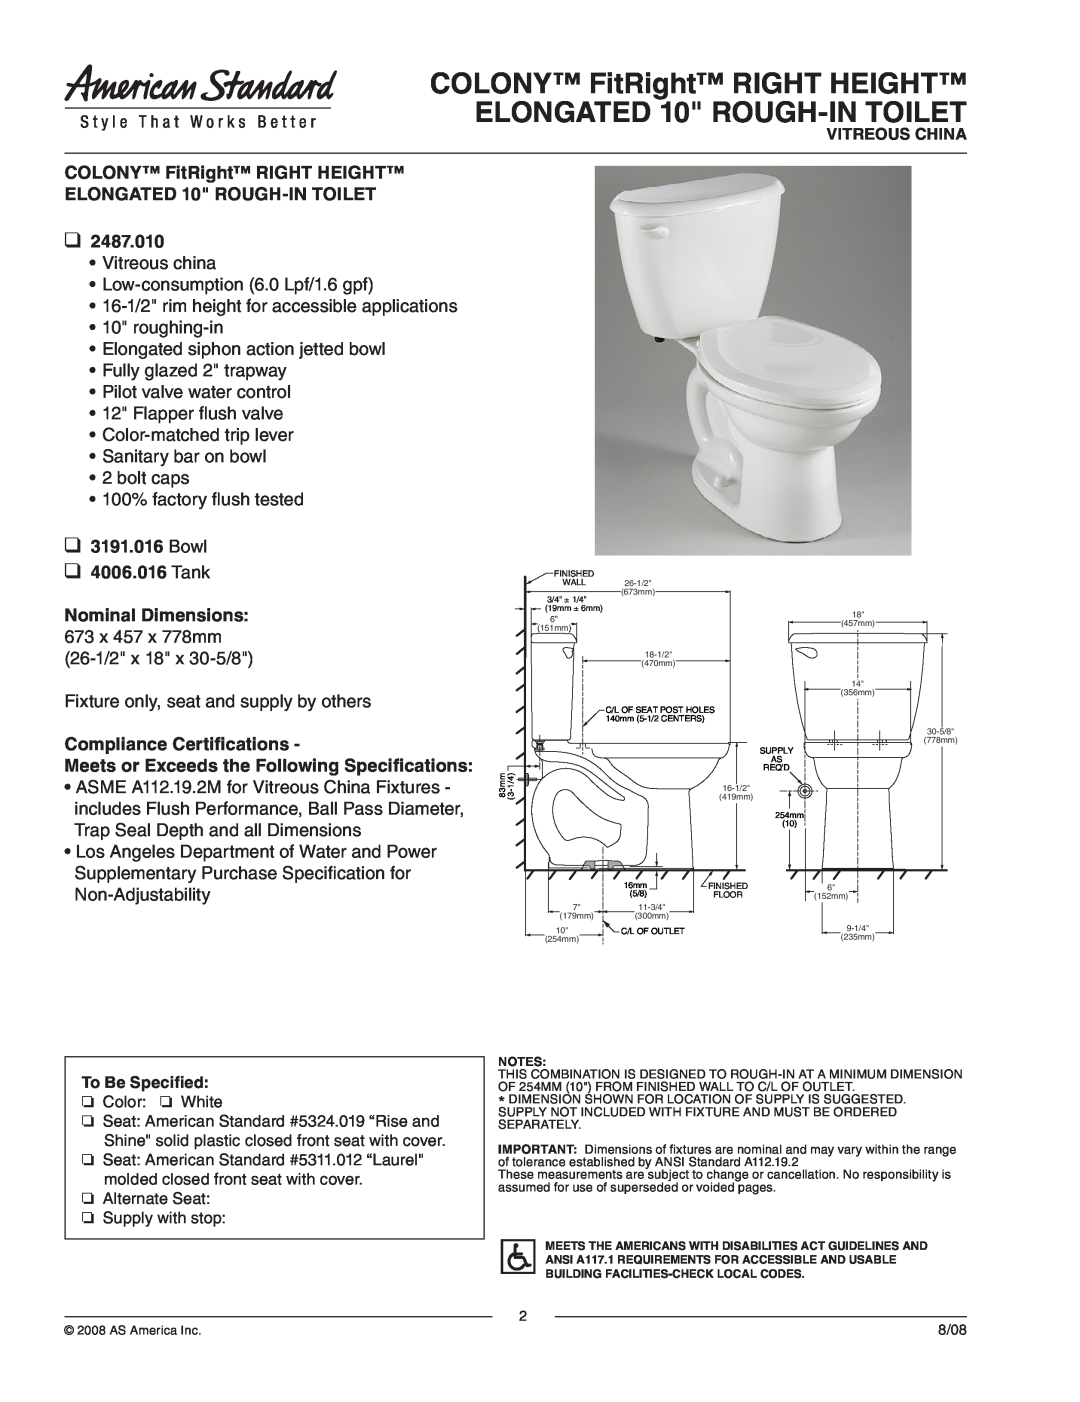 American Standard 2487.010 dimensions COLONY FitRight RIGHT HEIGHT, ELONGATED 10 ROUGH-INTOILET, Bowl, Tank 